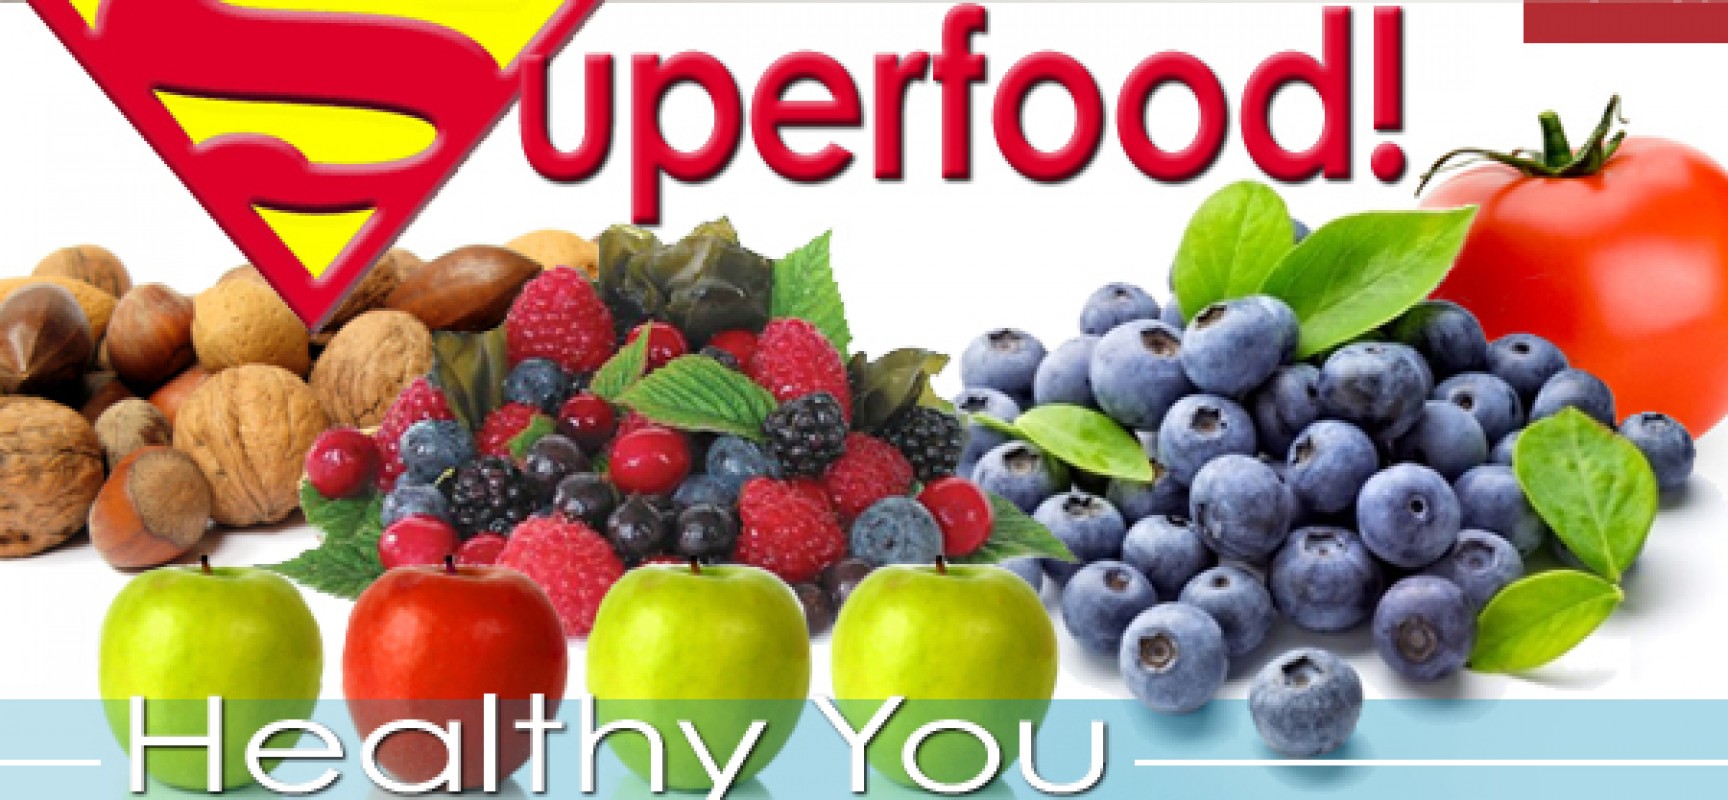 Go Healthy with these Superfoods!